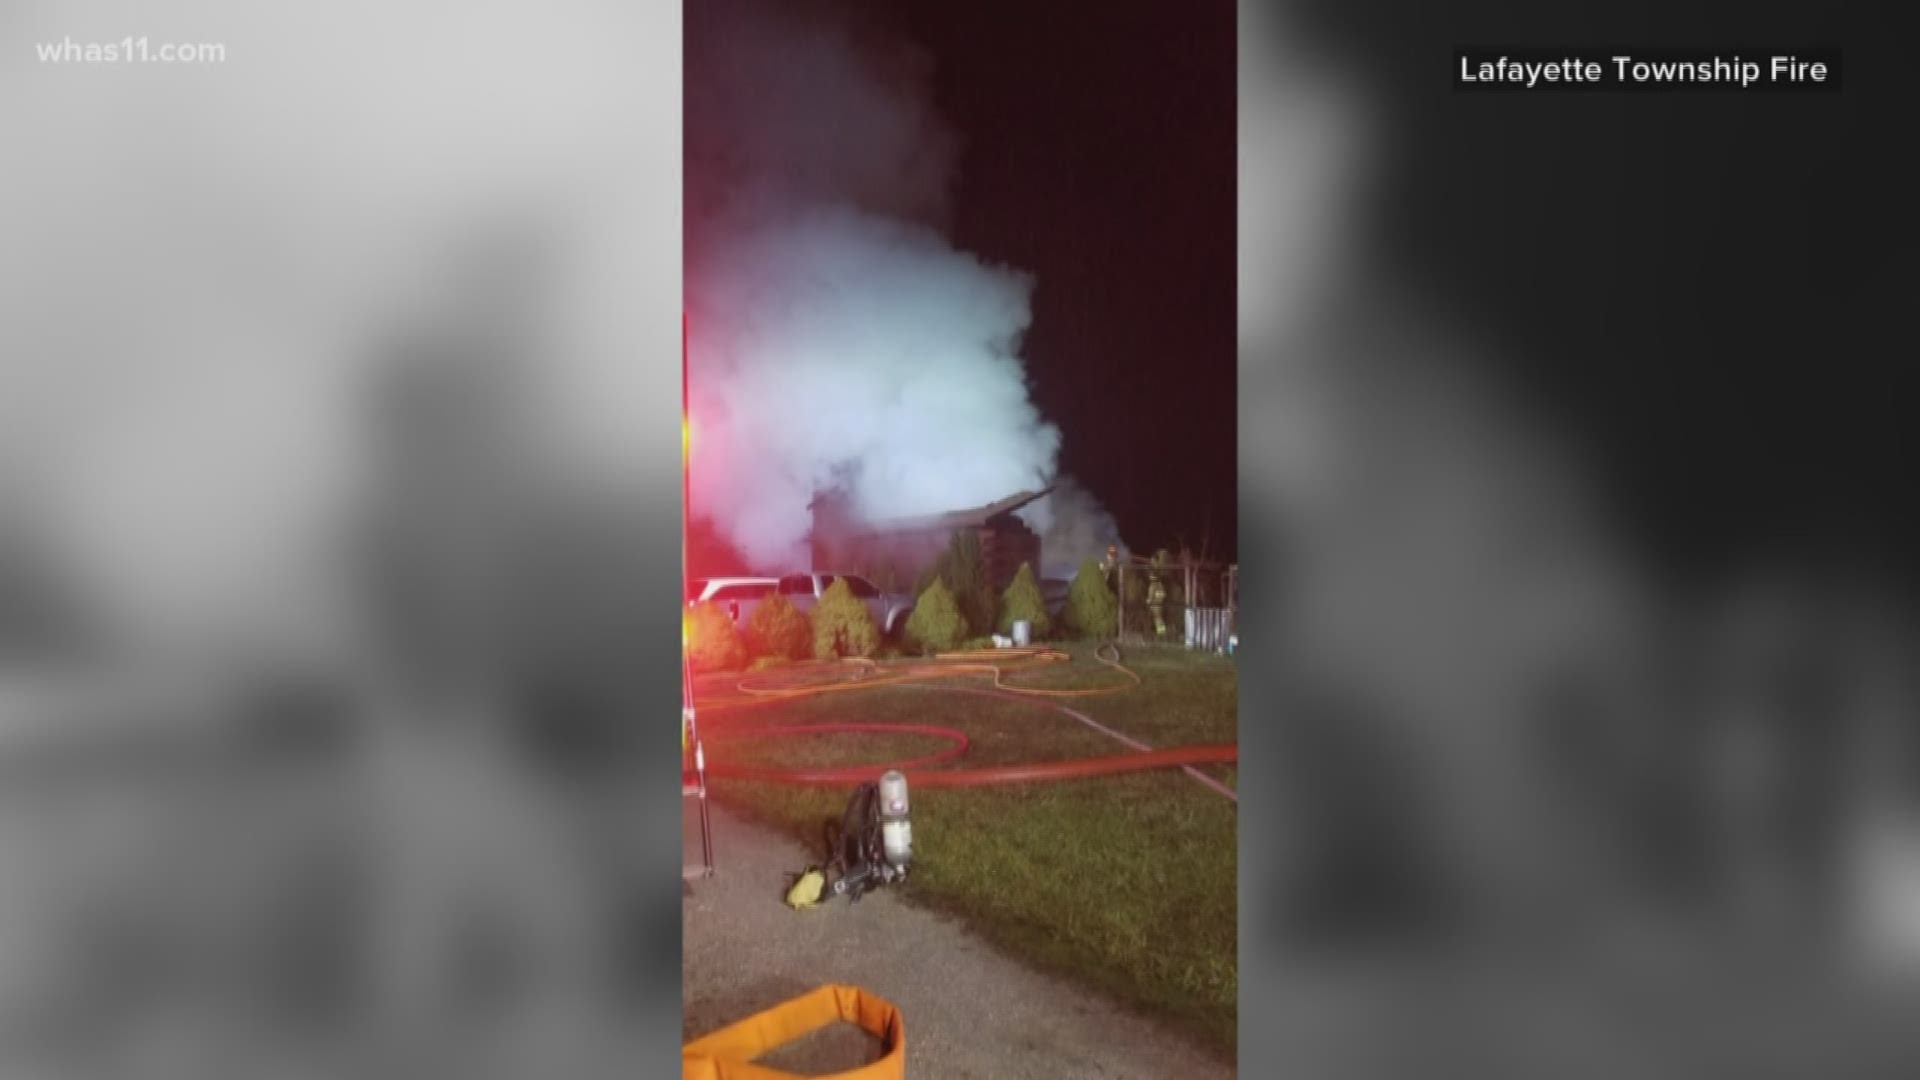 Several Indiana fire departments responded to a house fire on Mills Lane early Friday morning. Officials confirmed that it was deadly.